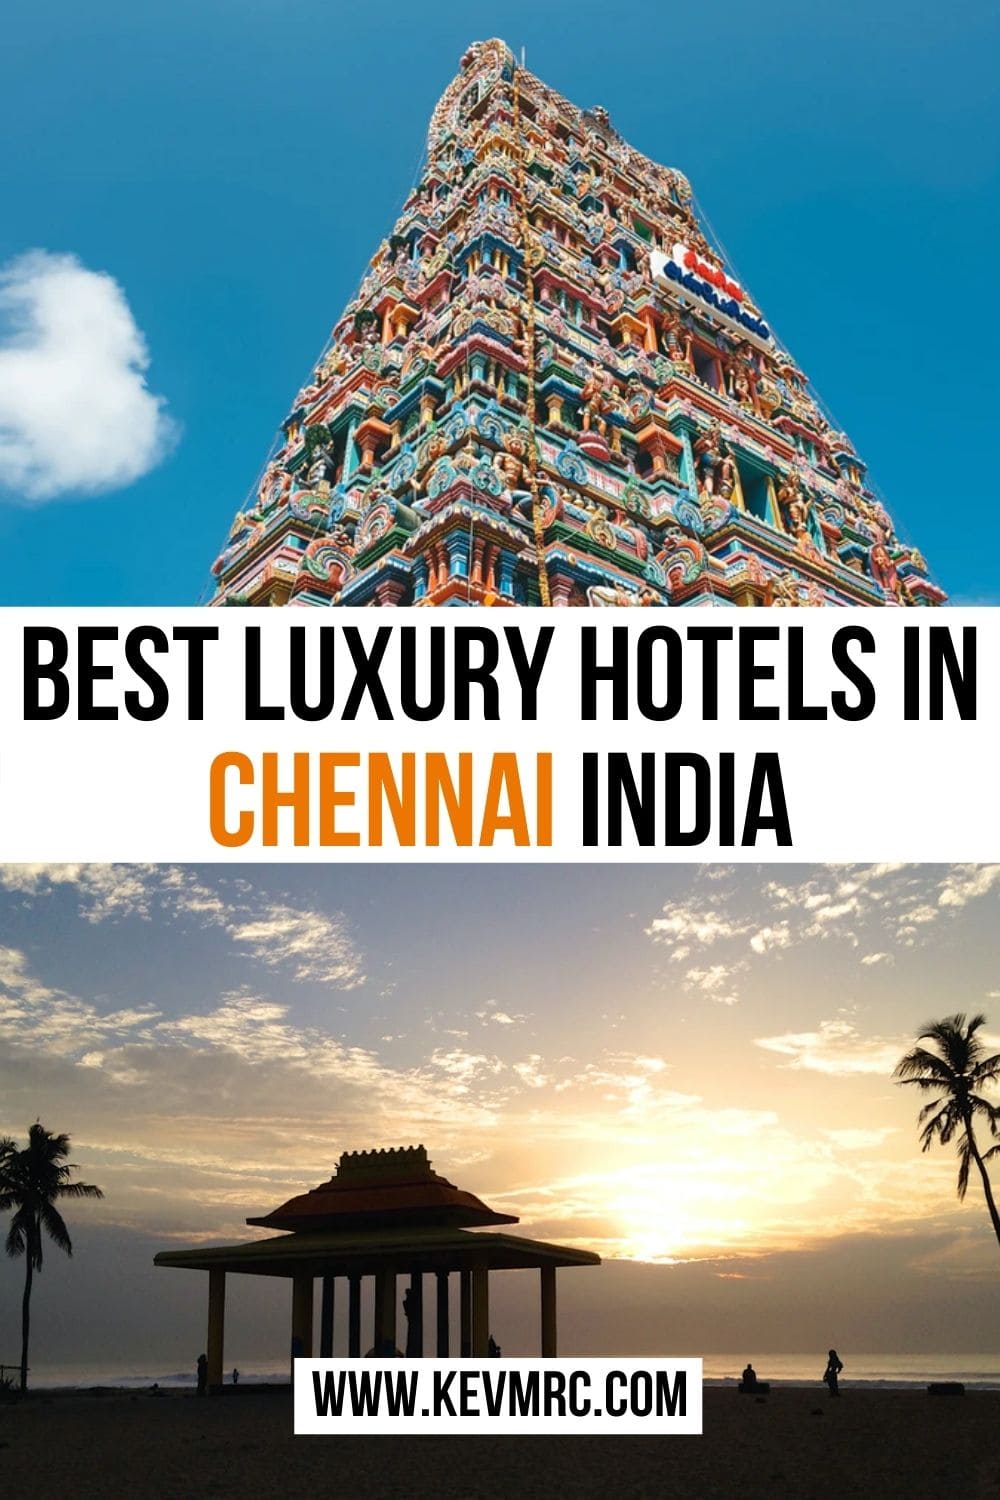 Best Luxury Hotels in Chennai India. Spending your vacation there in a 5-star hotel is of course, a very good choice! You can stroll around the city all day, and enjoy the comfort of a luxury room to rest at night. I’ve made this post to help you find the right 5-star hotel there! hotels in chennai | chennai hotels | chennai city